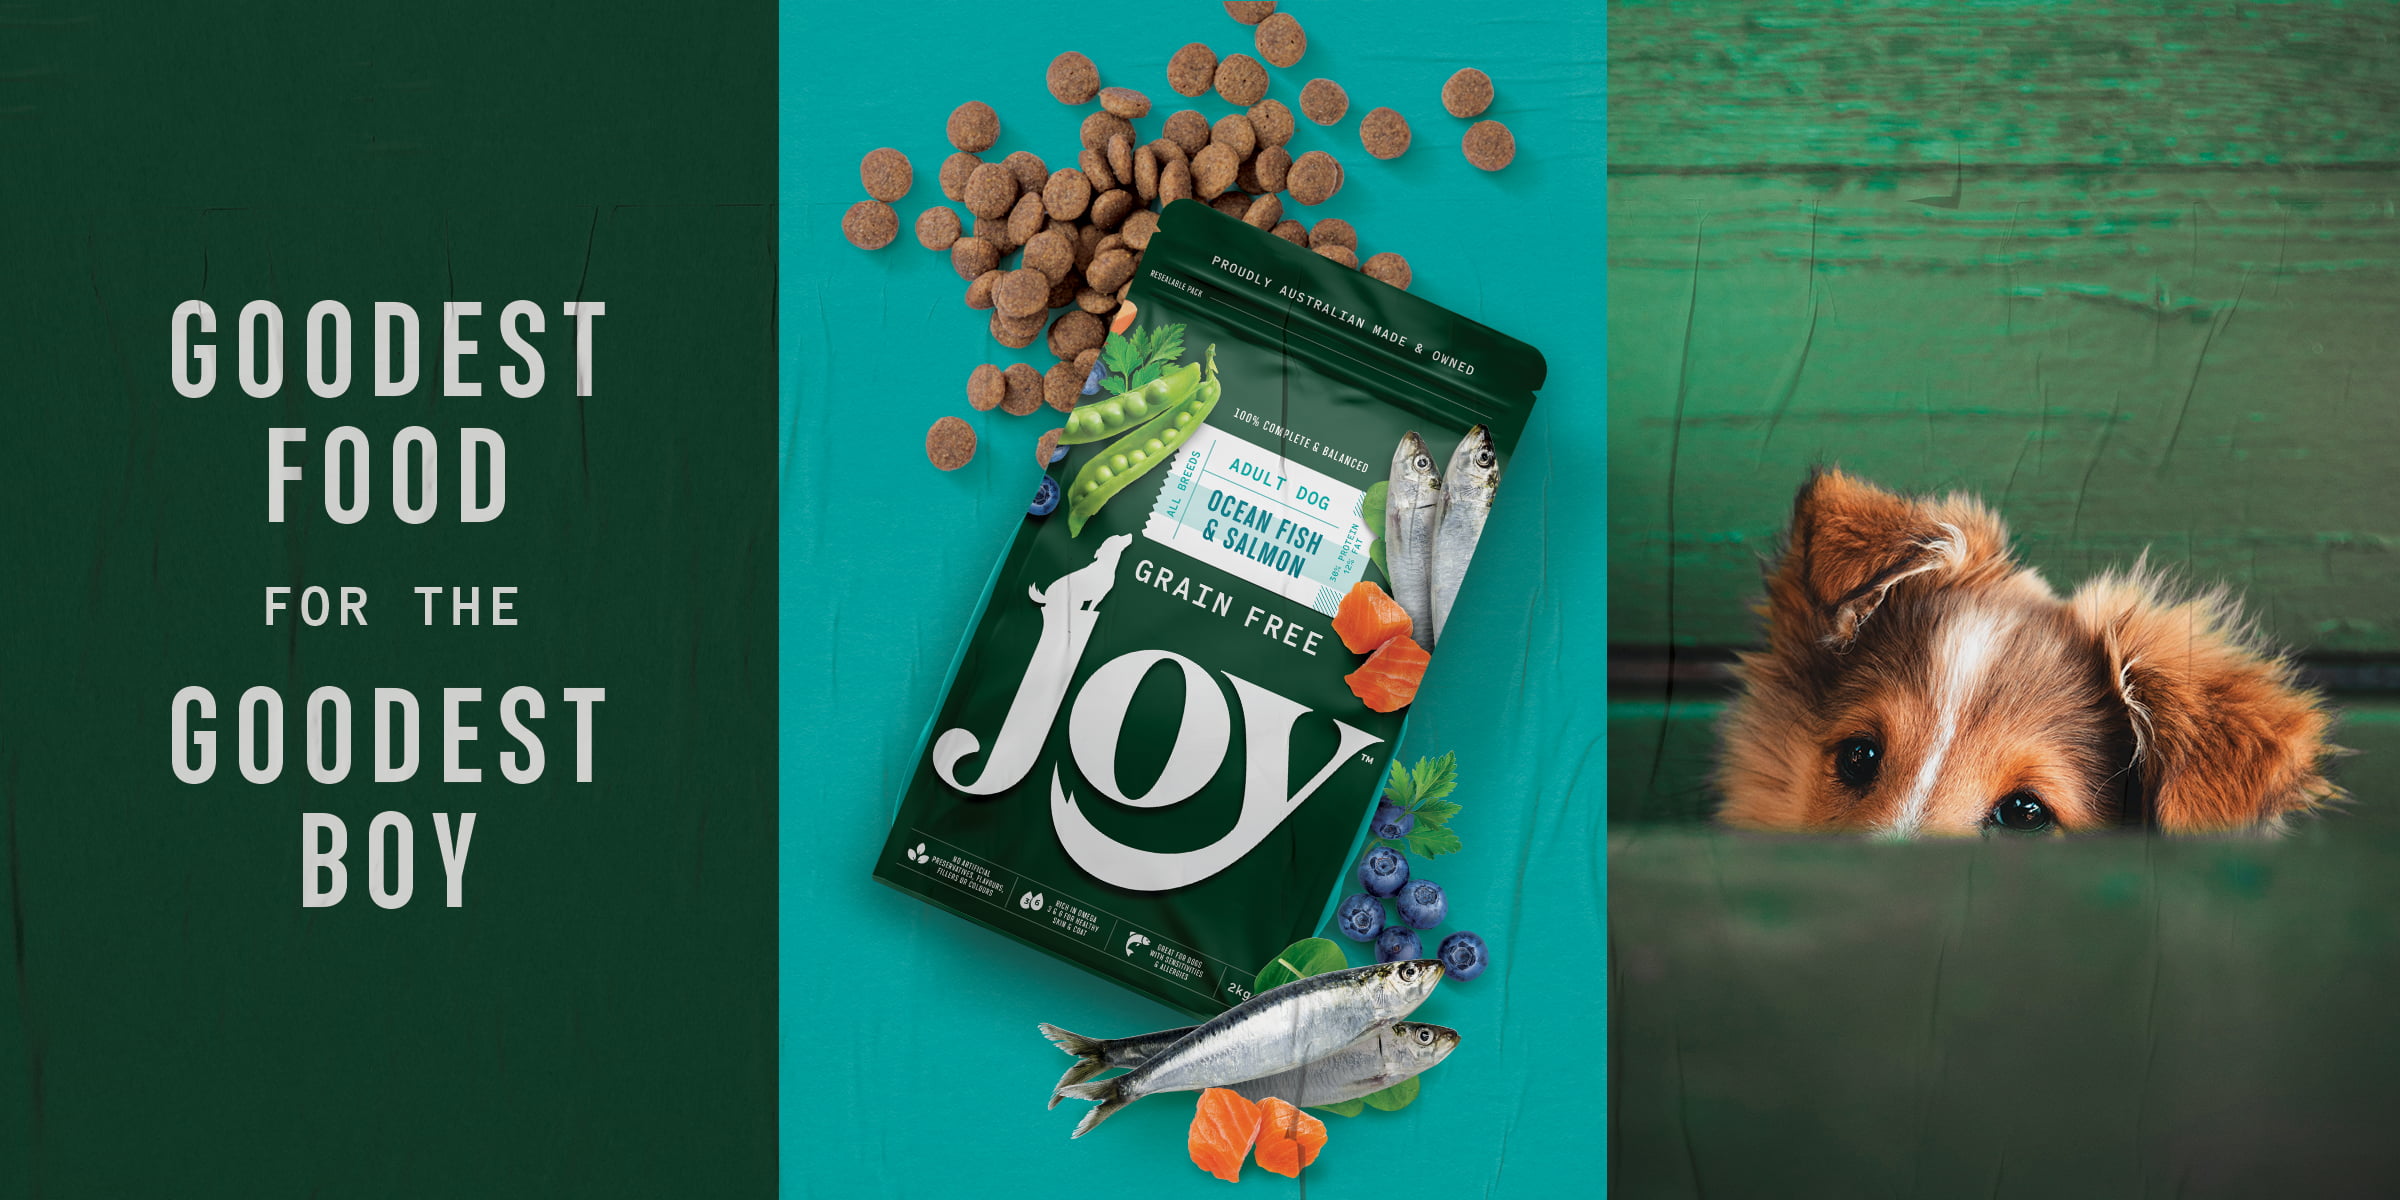 ocean-fish-and-salmon-dog-food-premium-package-redesign-brand-creative-green-luxury-real-ingredients-doggy-puppy